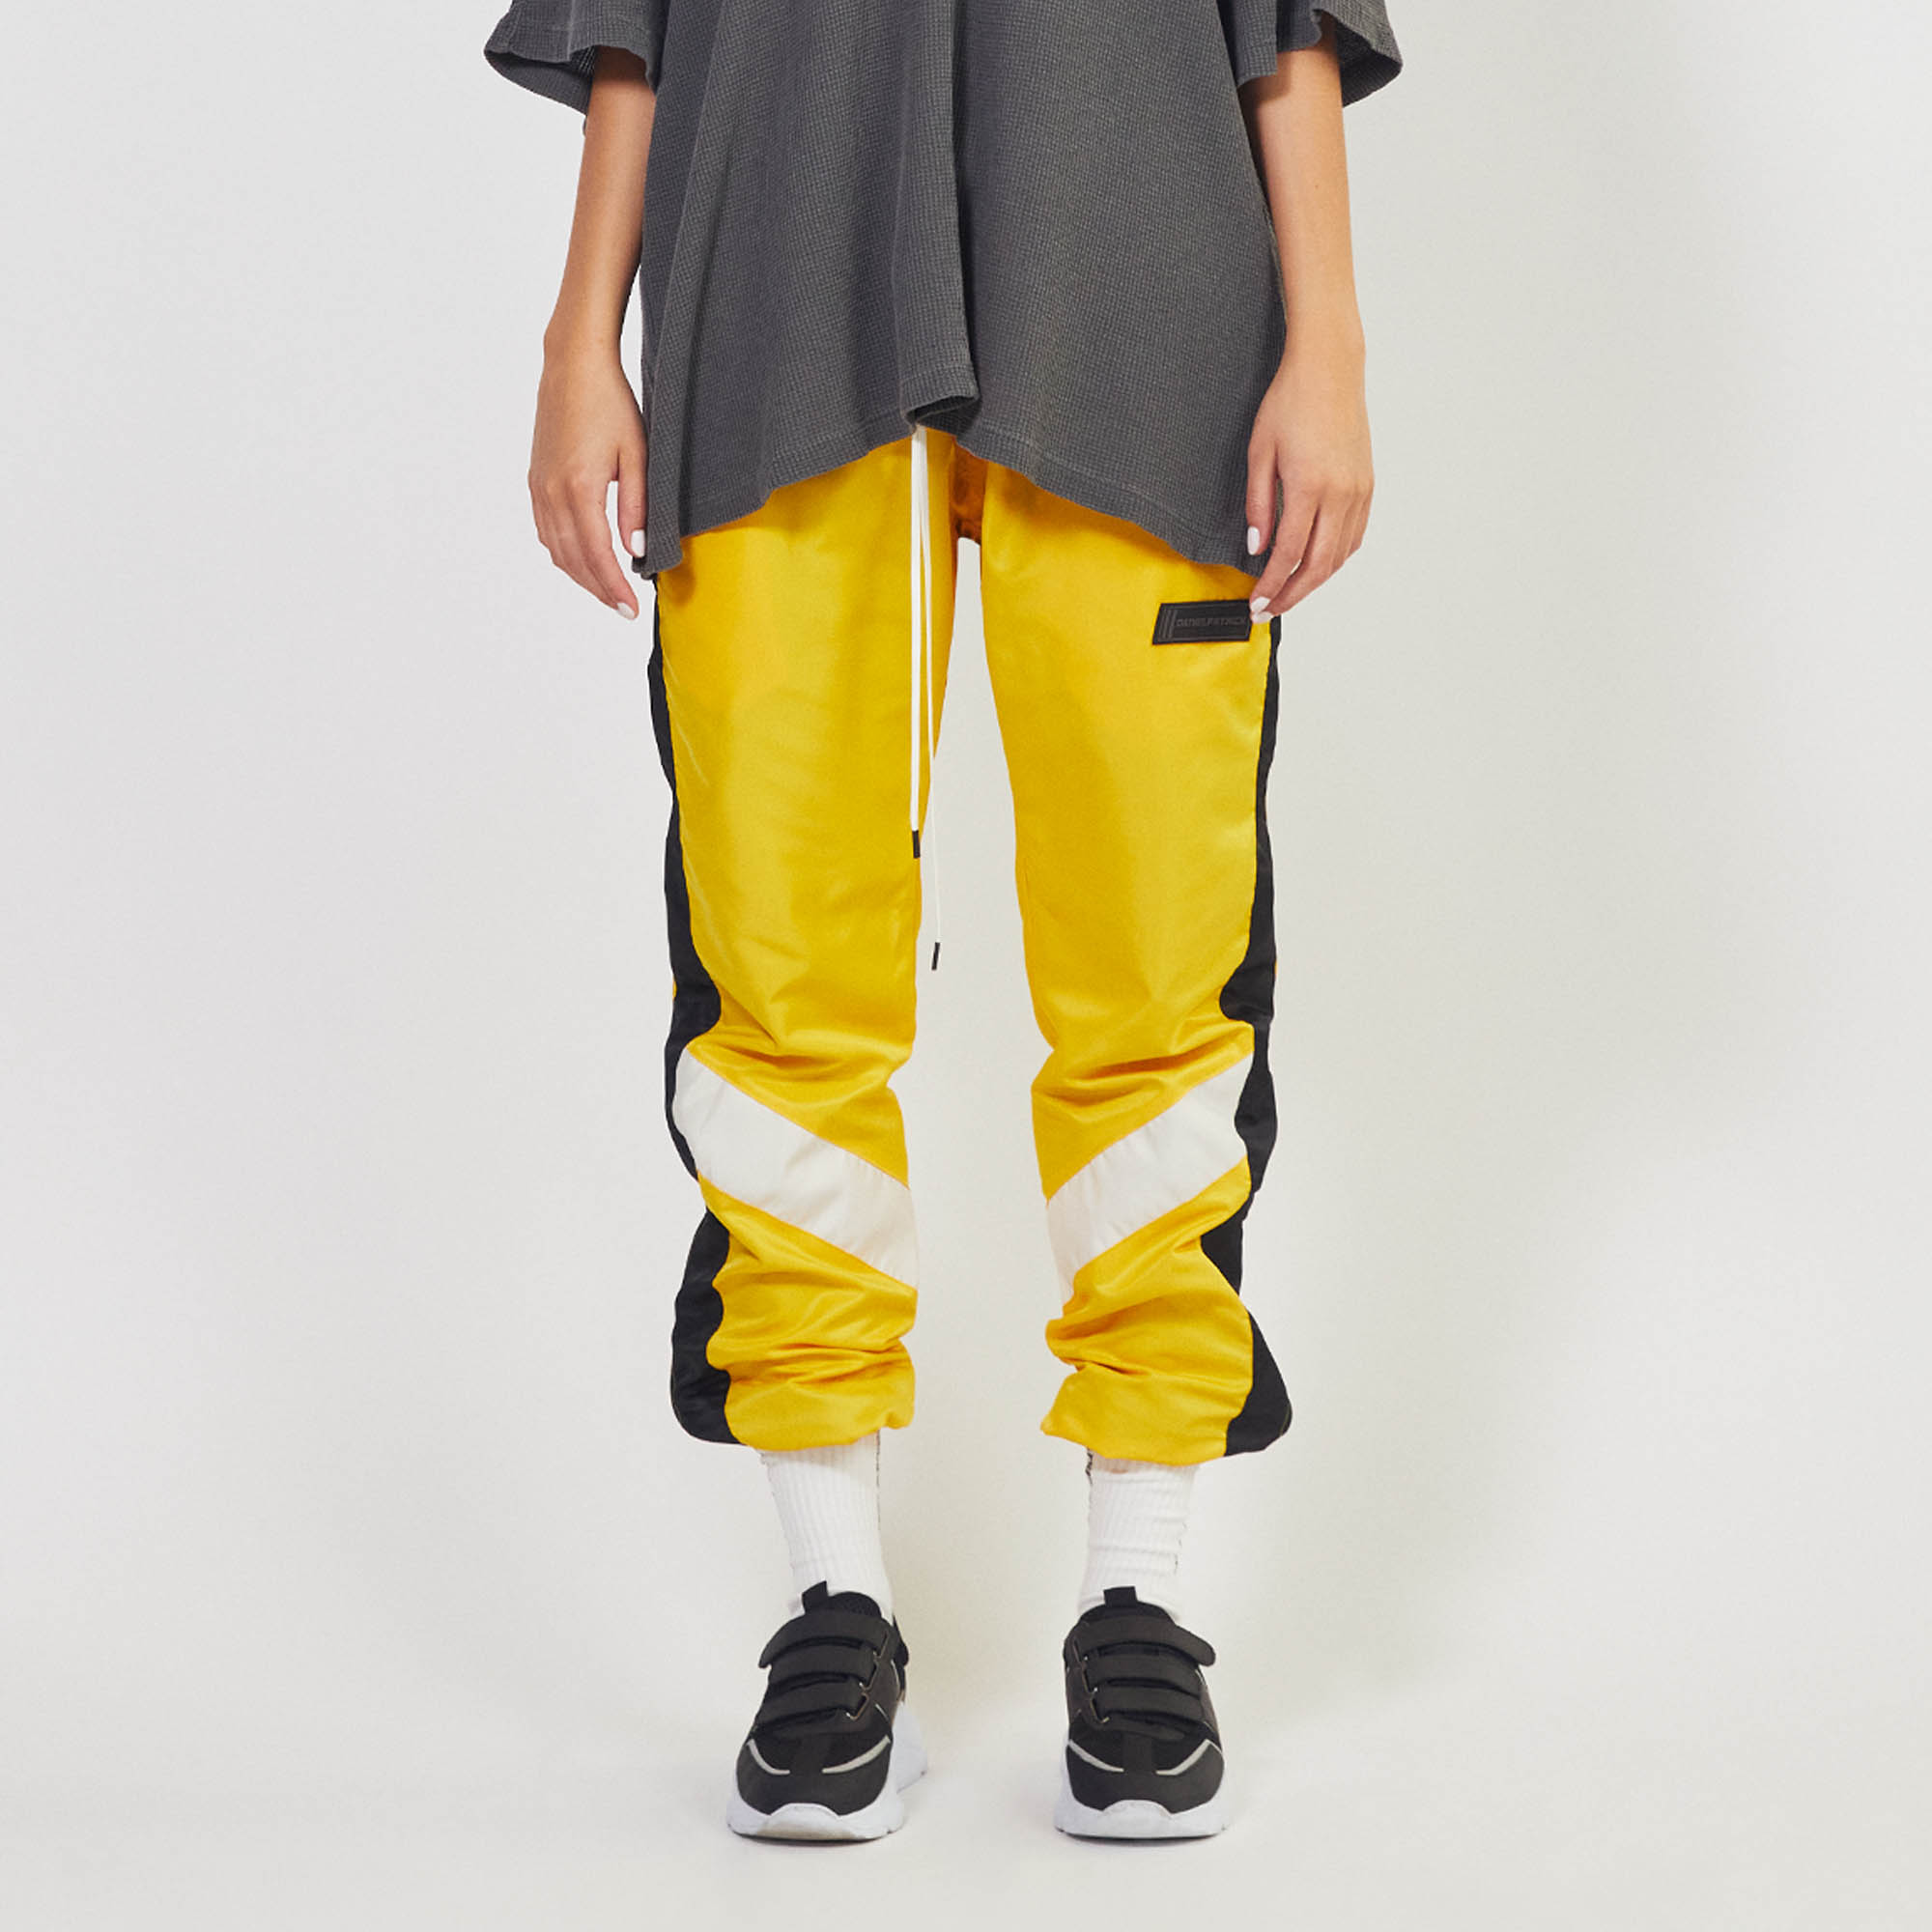 NTWRK - Racee Yellow Stacked Flare Track Pant